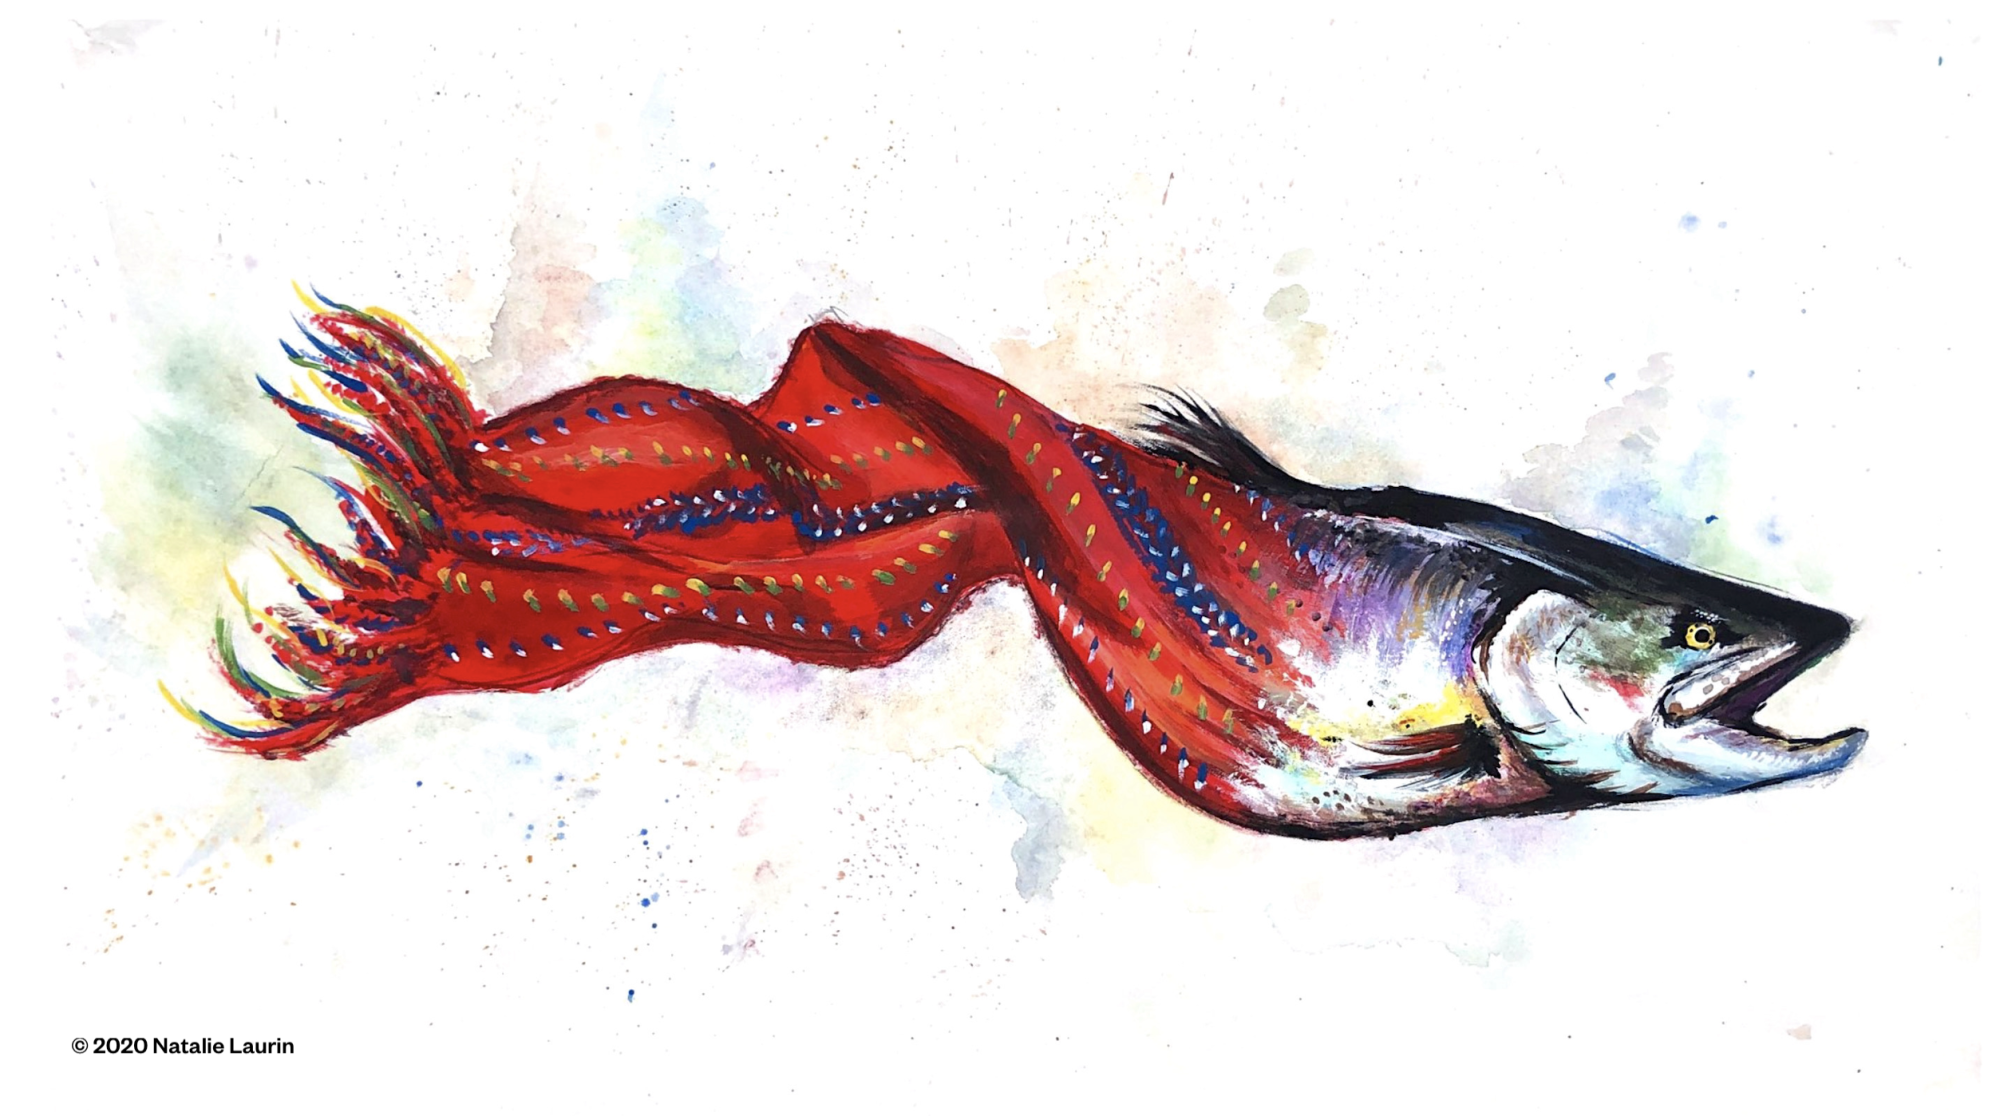 Acrylic and watercolour illustration of a salmon swimming off to the right, with its tail turning into a red Métis sash halfway down its body